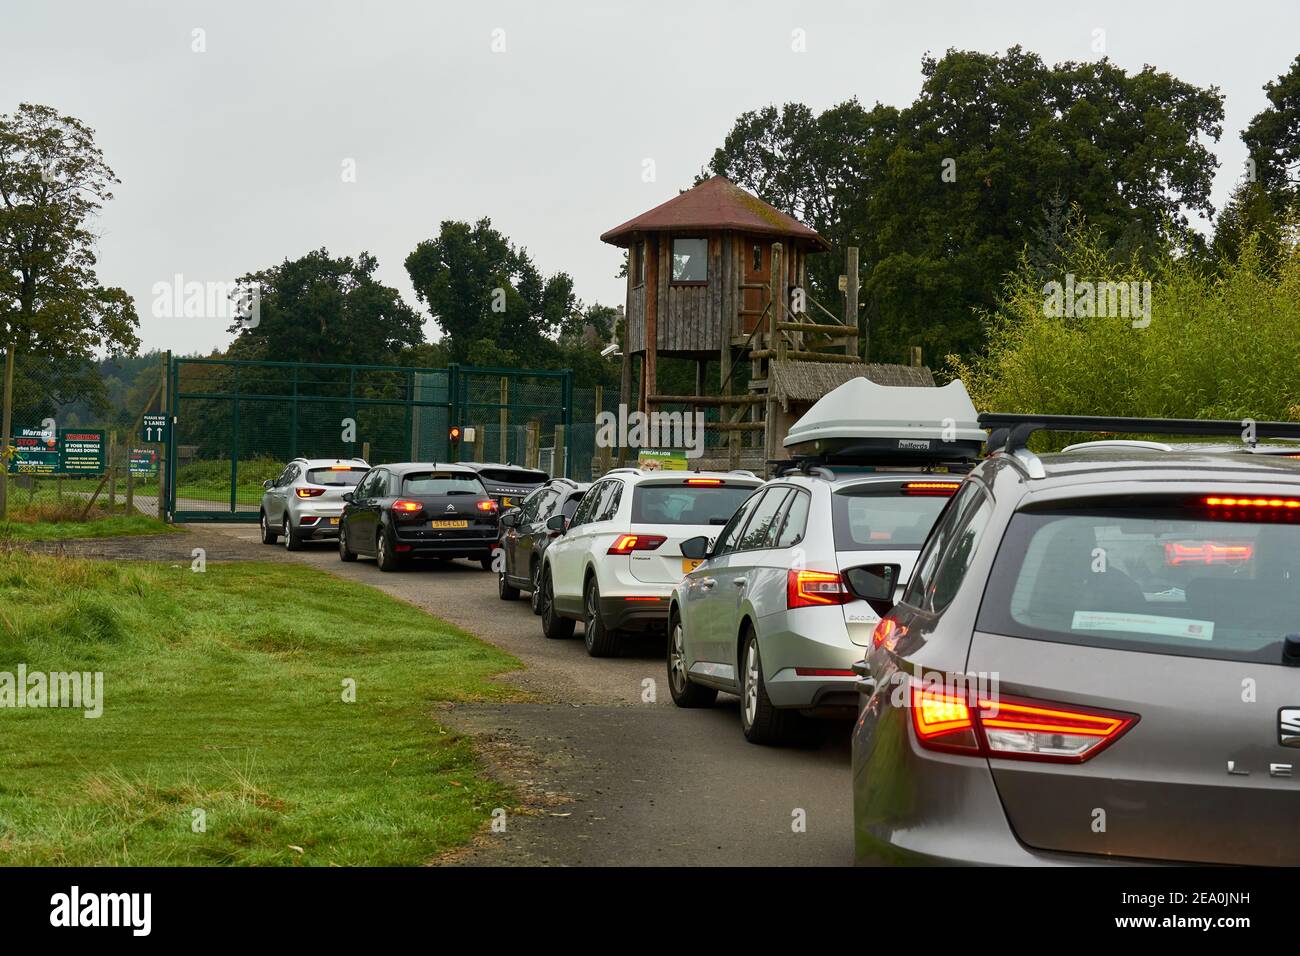 A queue of cars awaiting entrance to the fenced off section of the Blair Drummond Safari and Adventure Park. Stock Photo